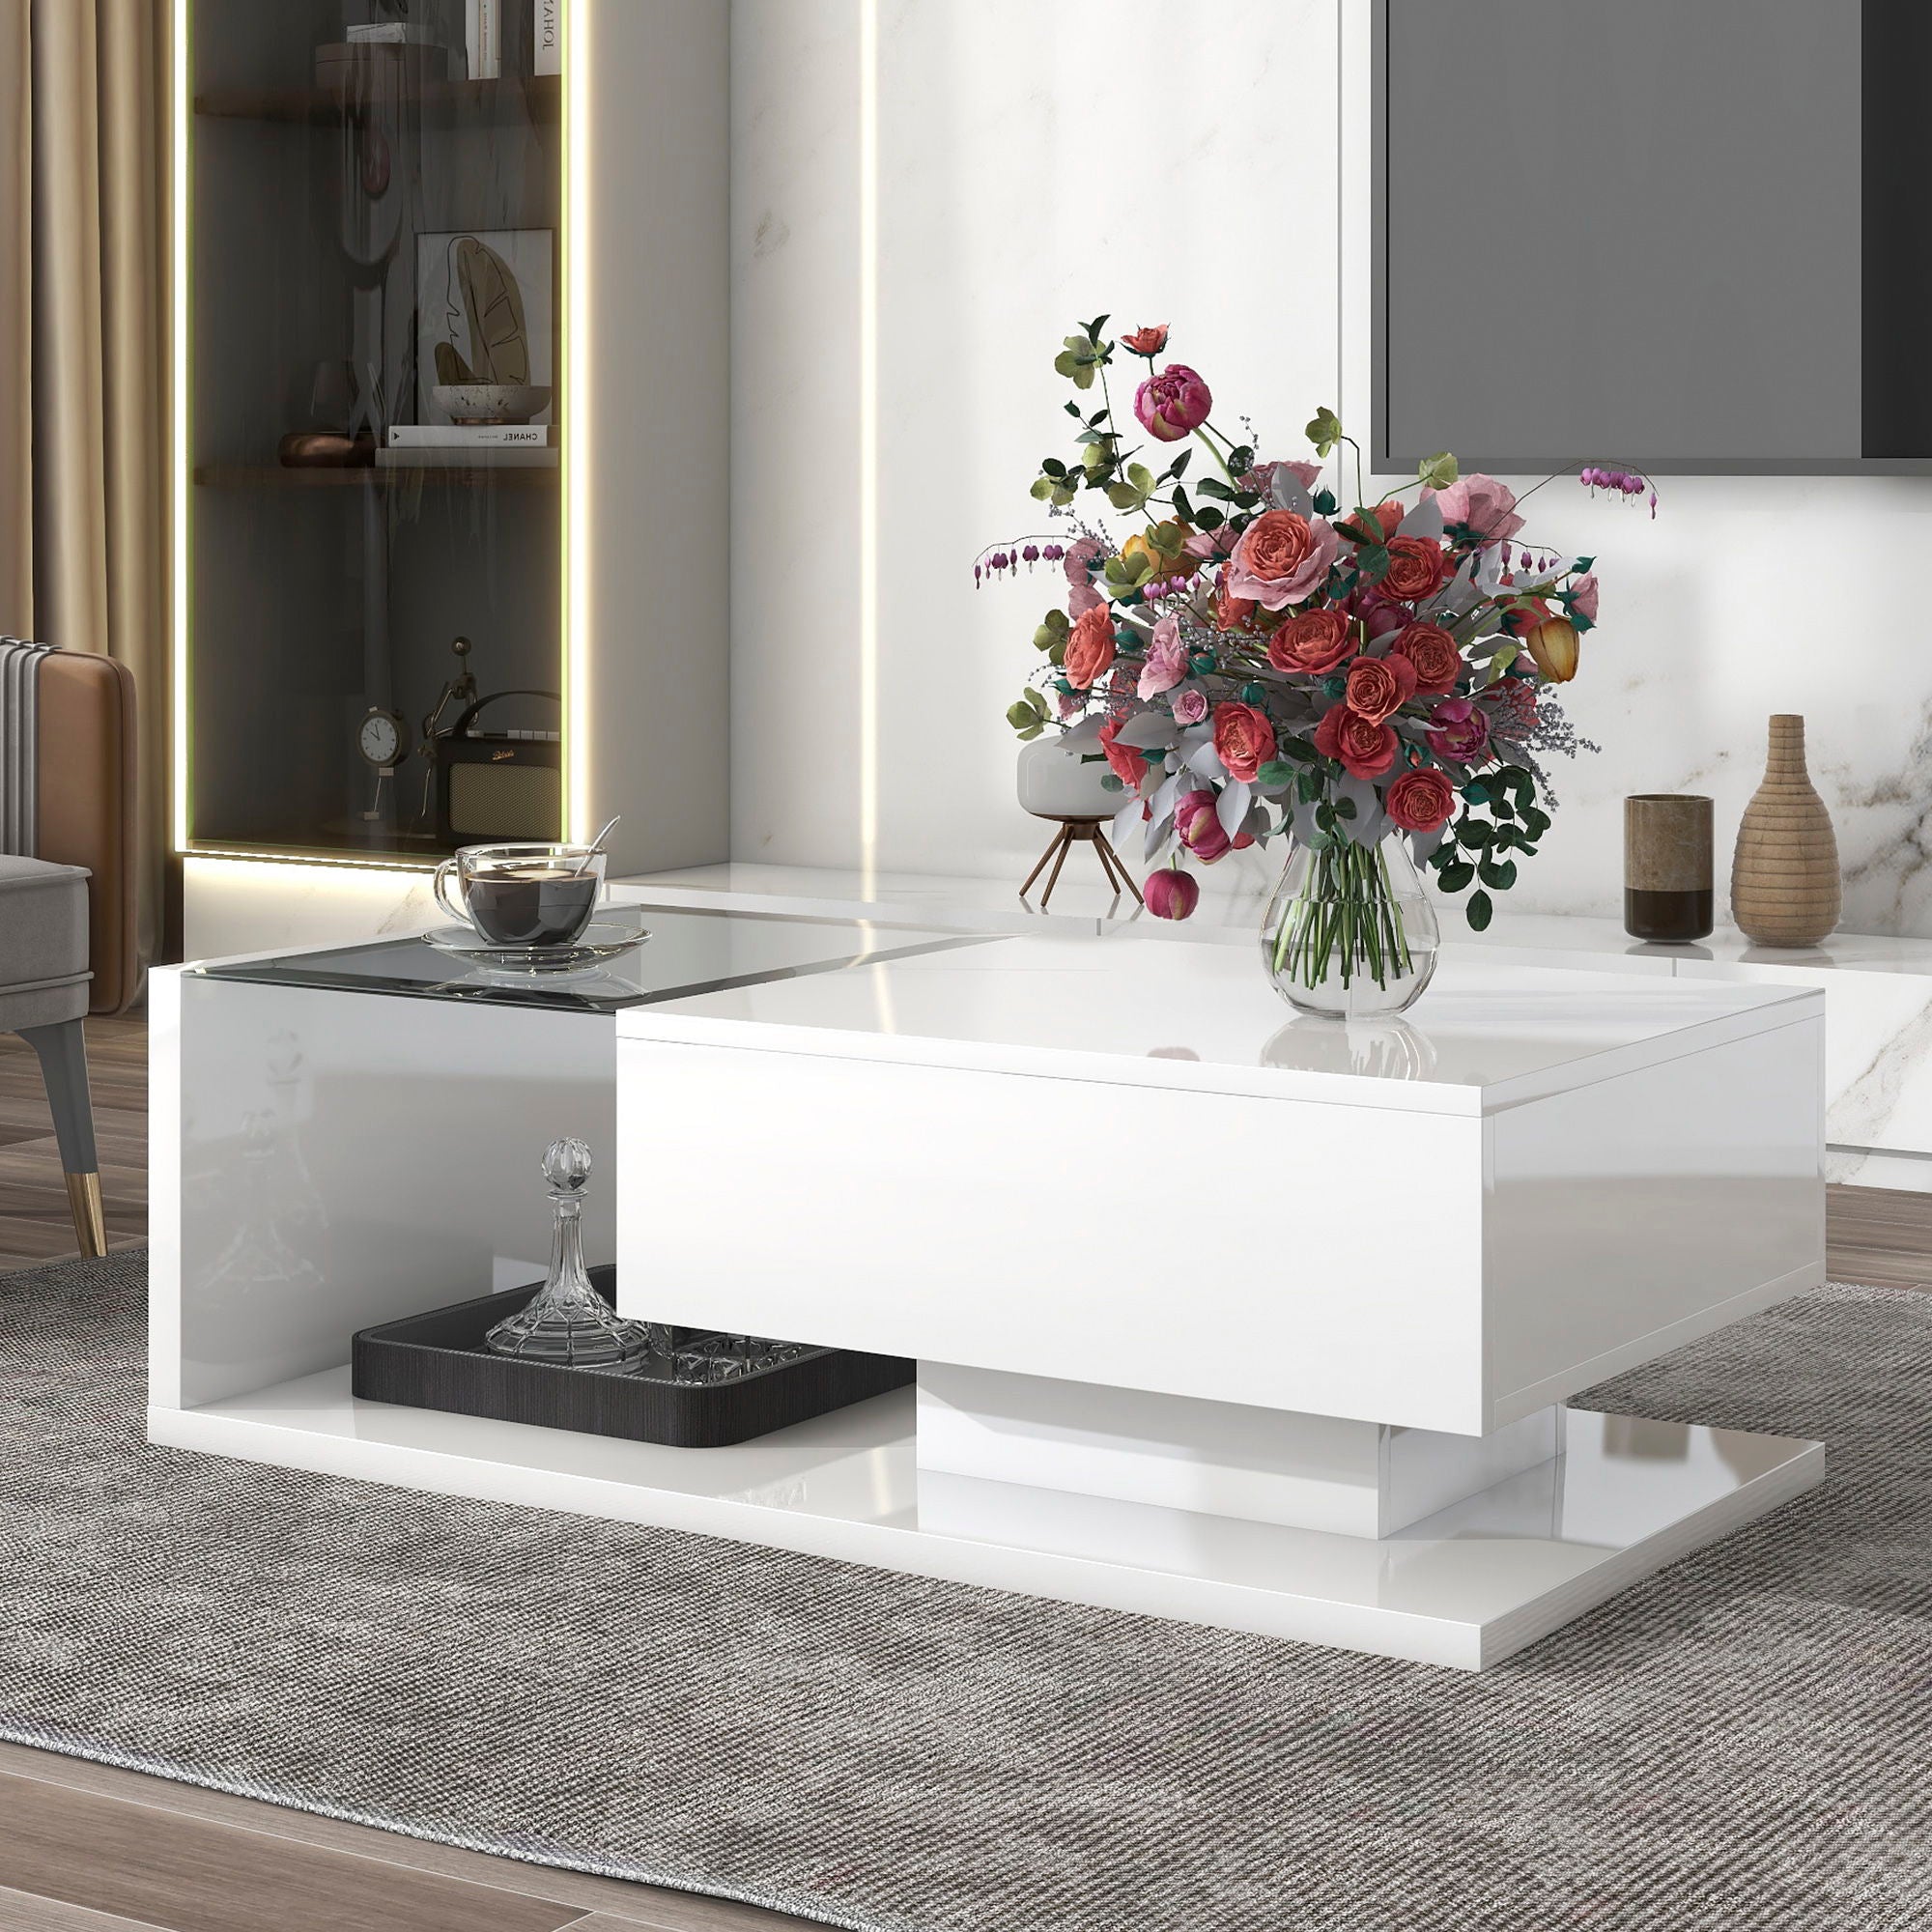 On-Trend Modern Coffee Table With Tempered Glass, Wooden Cocktail Table With High-Gloss Uv Surface, Modernist 2-Tier Rectangle Center Table For Living Room, White